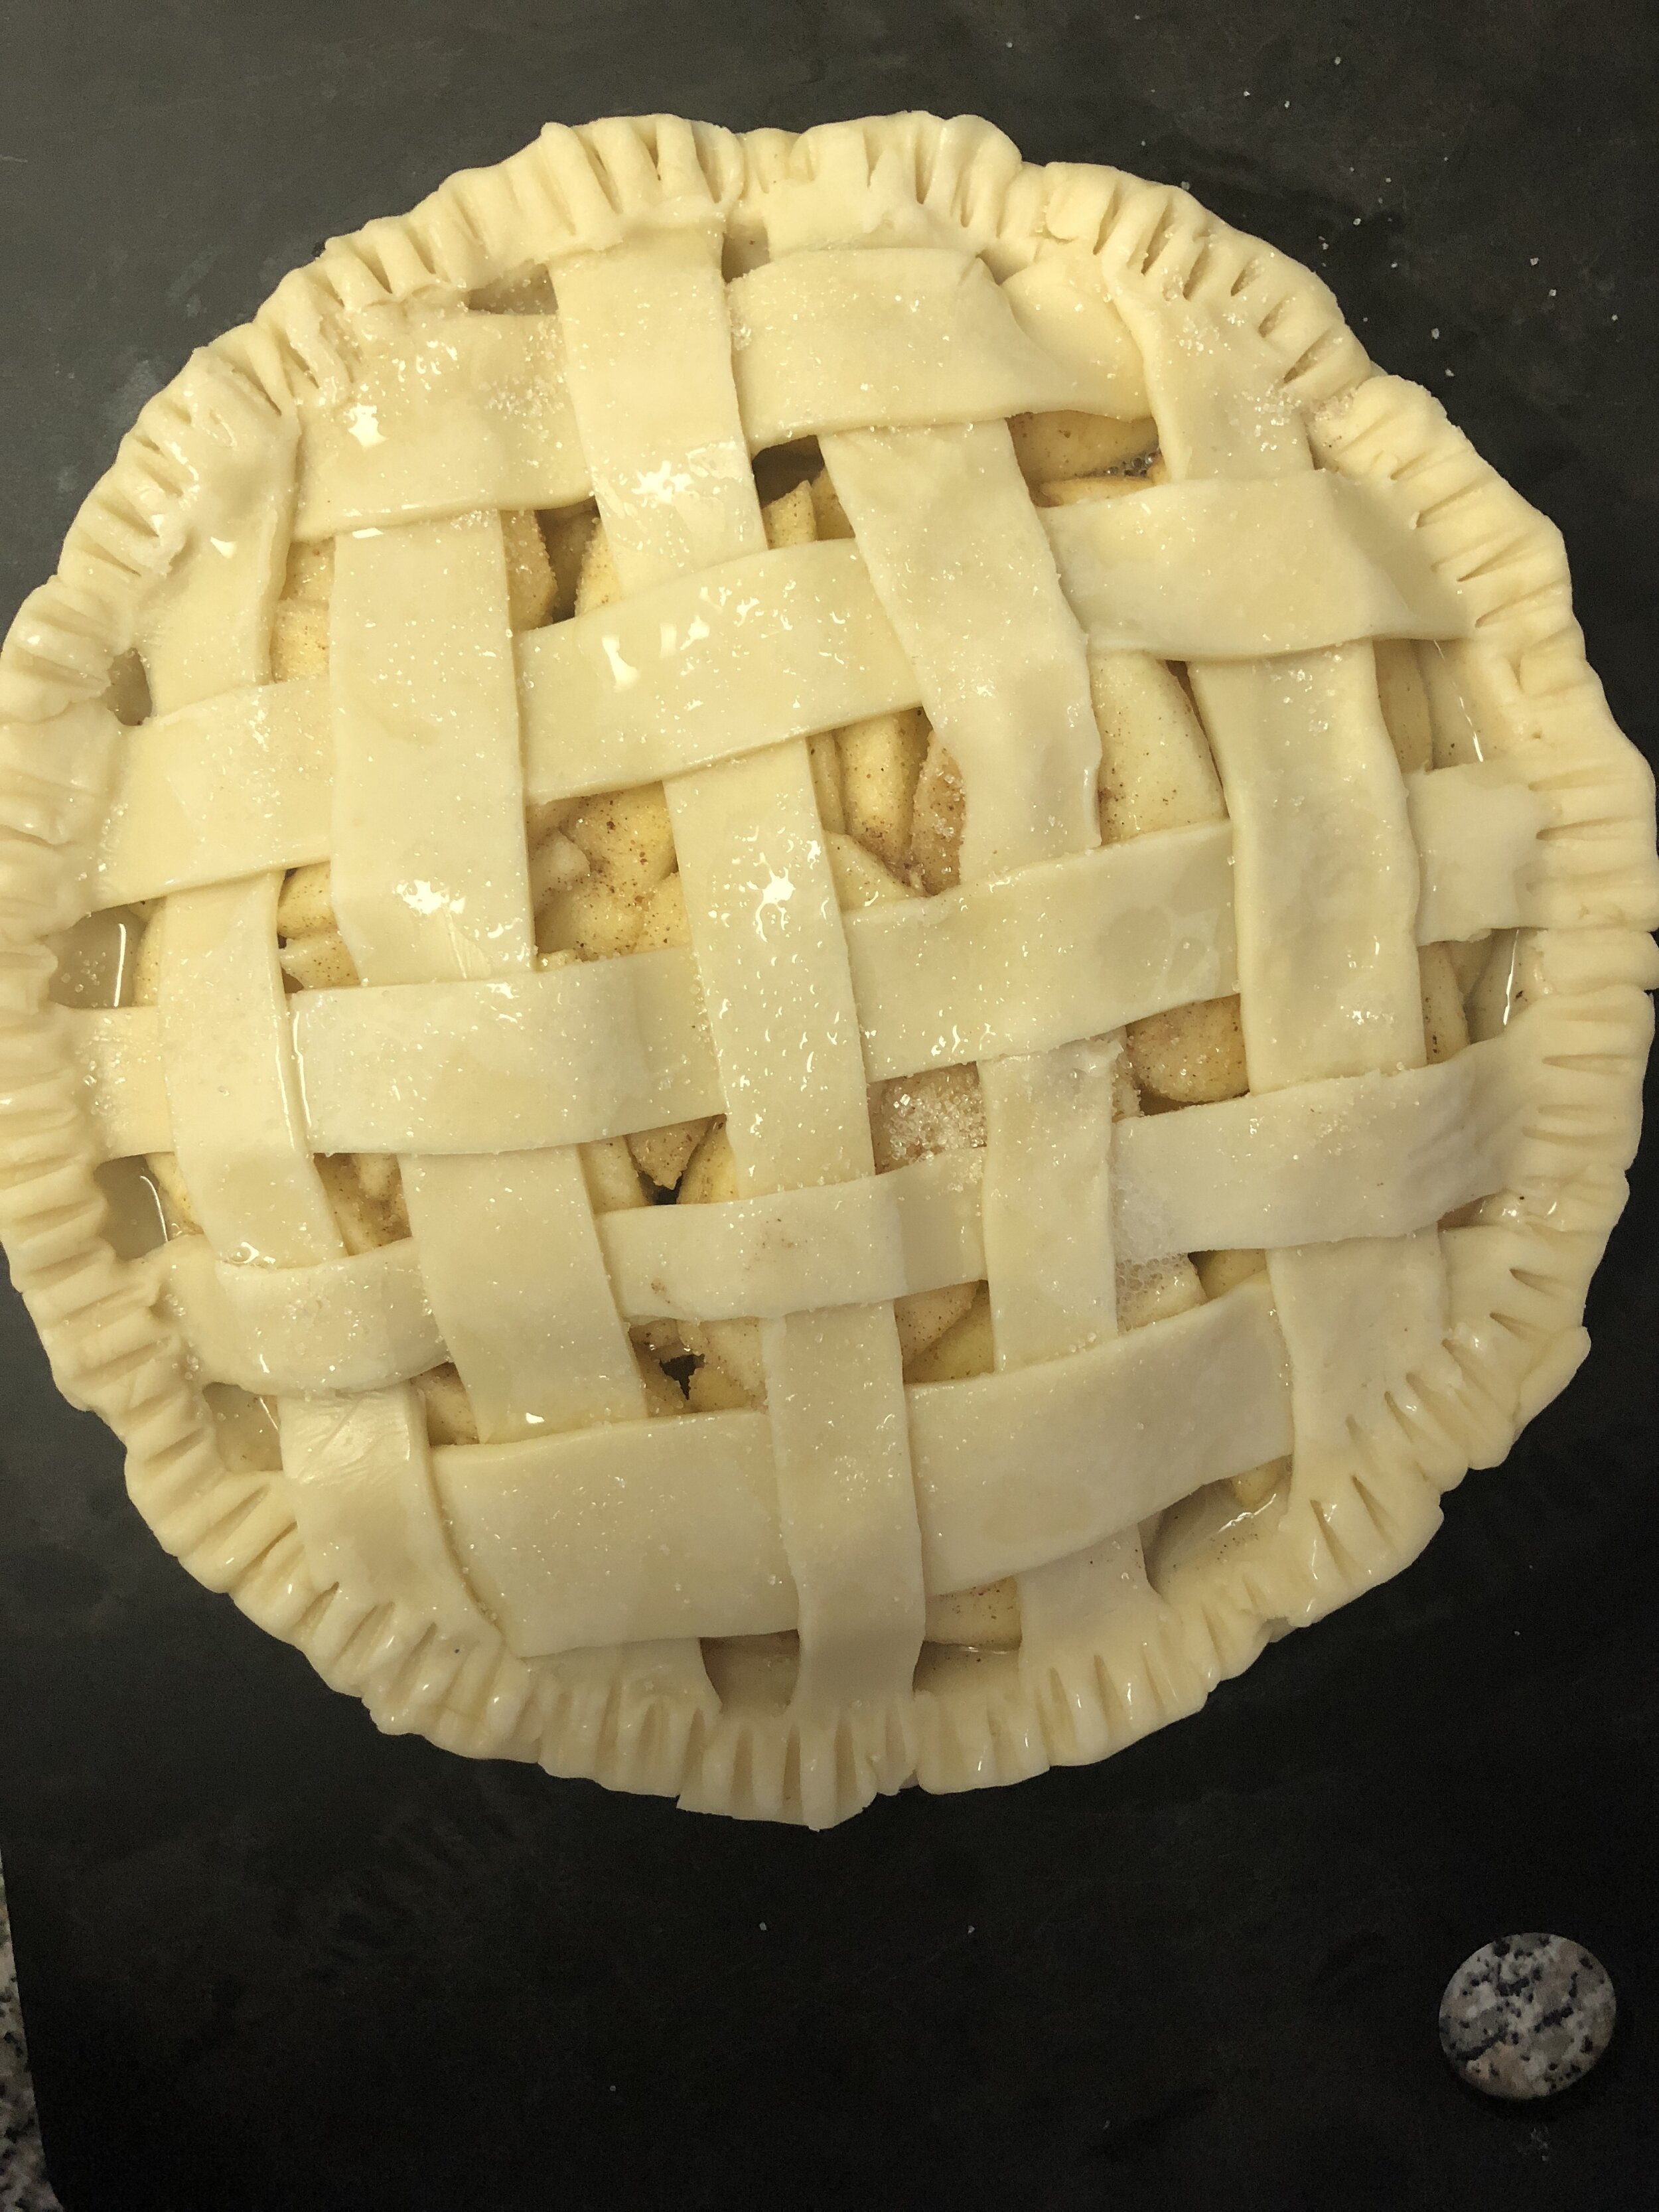 gluten free apple pie with latticework top before the oven.